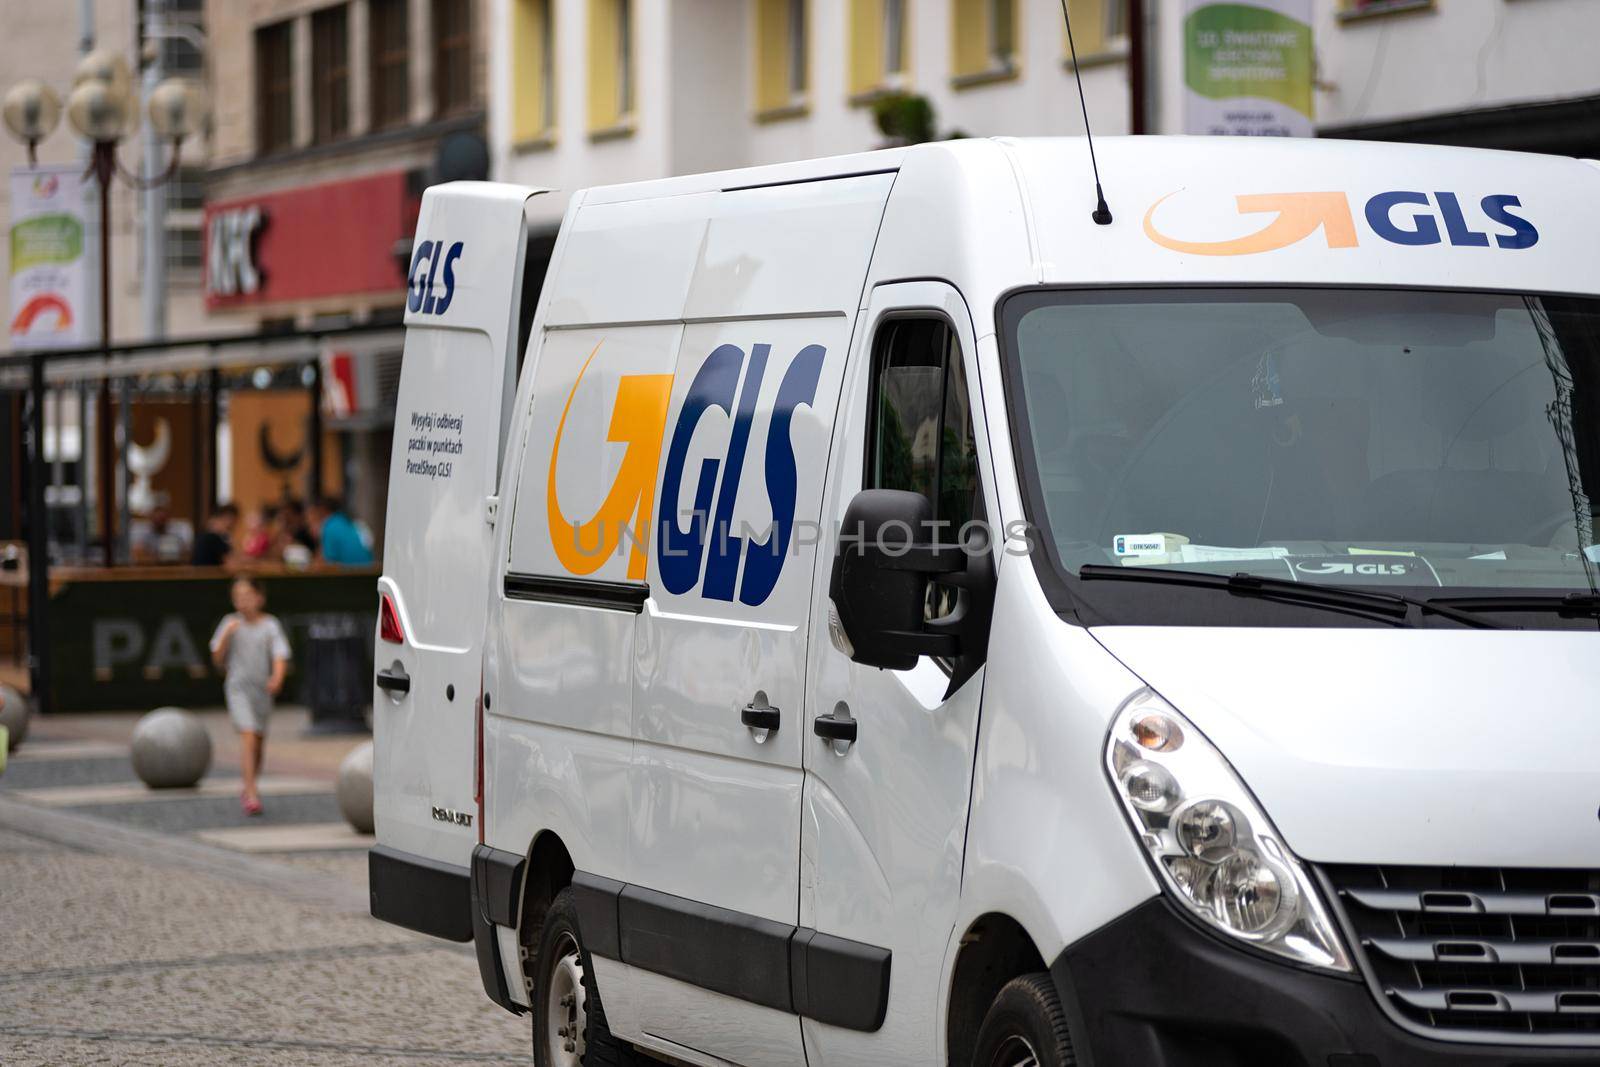 Wroclaw, Poland - July 20, 2017: GLS courier delivers shipments to the customer. GLS is one of the largest postal shipping company on the world.